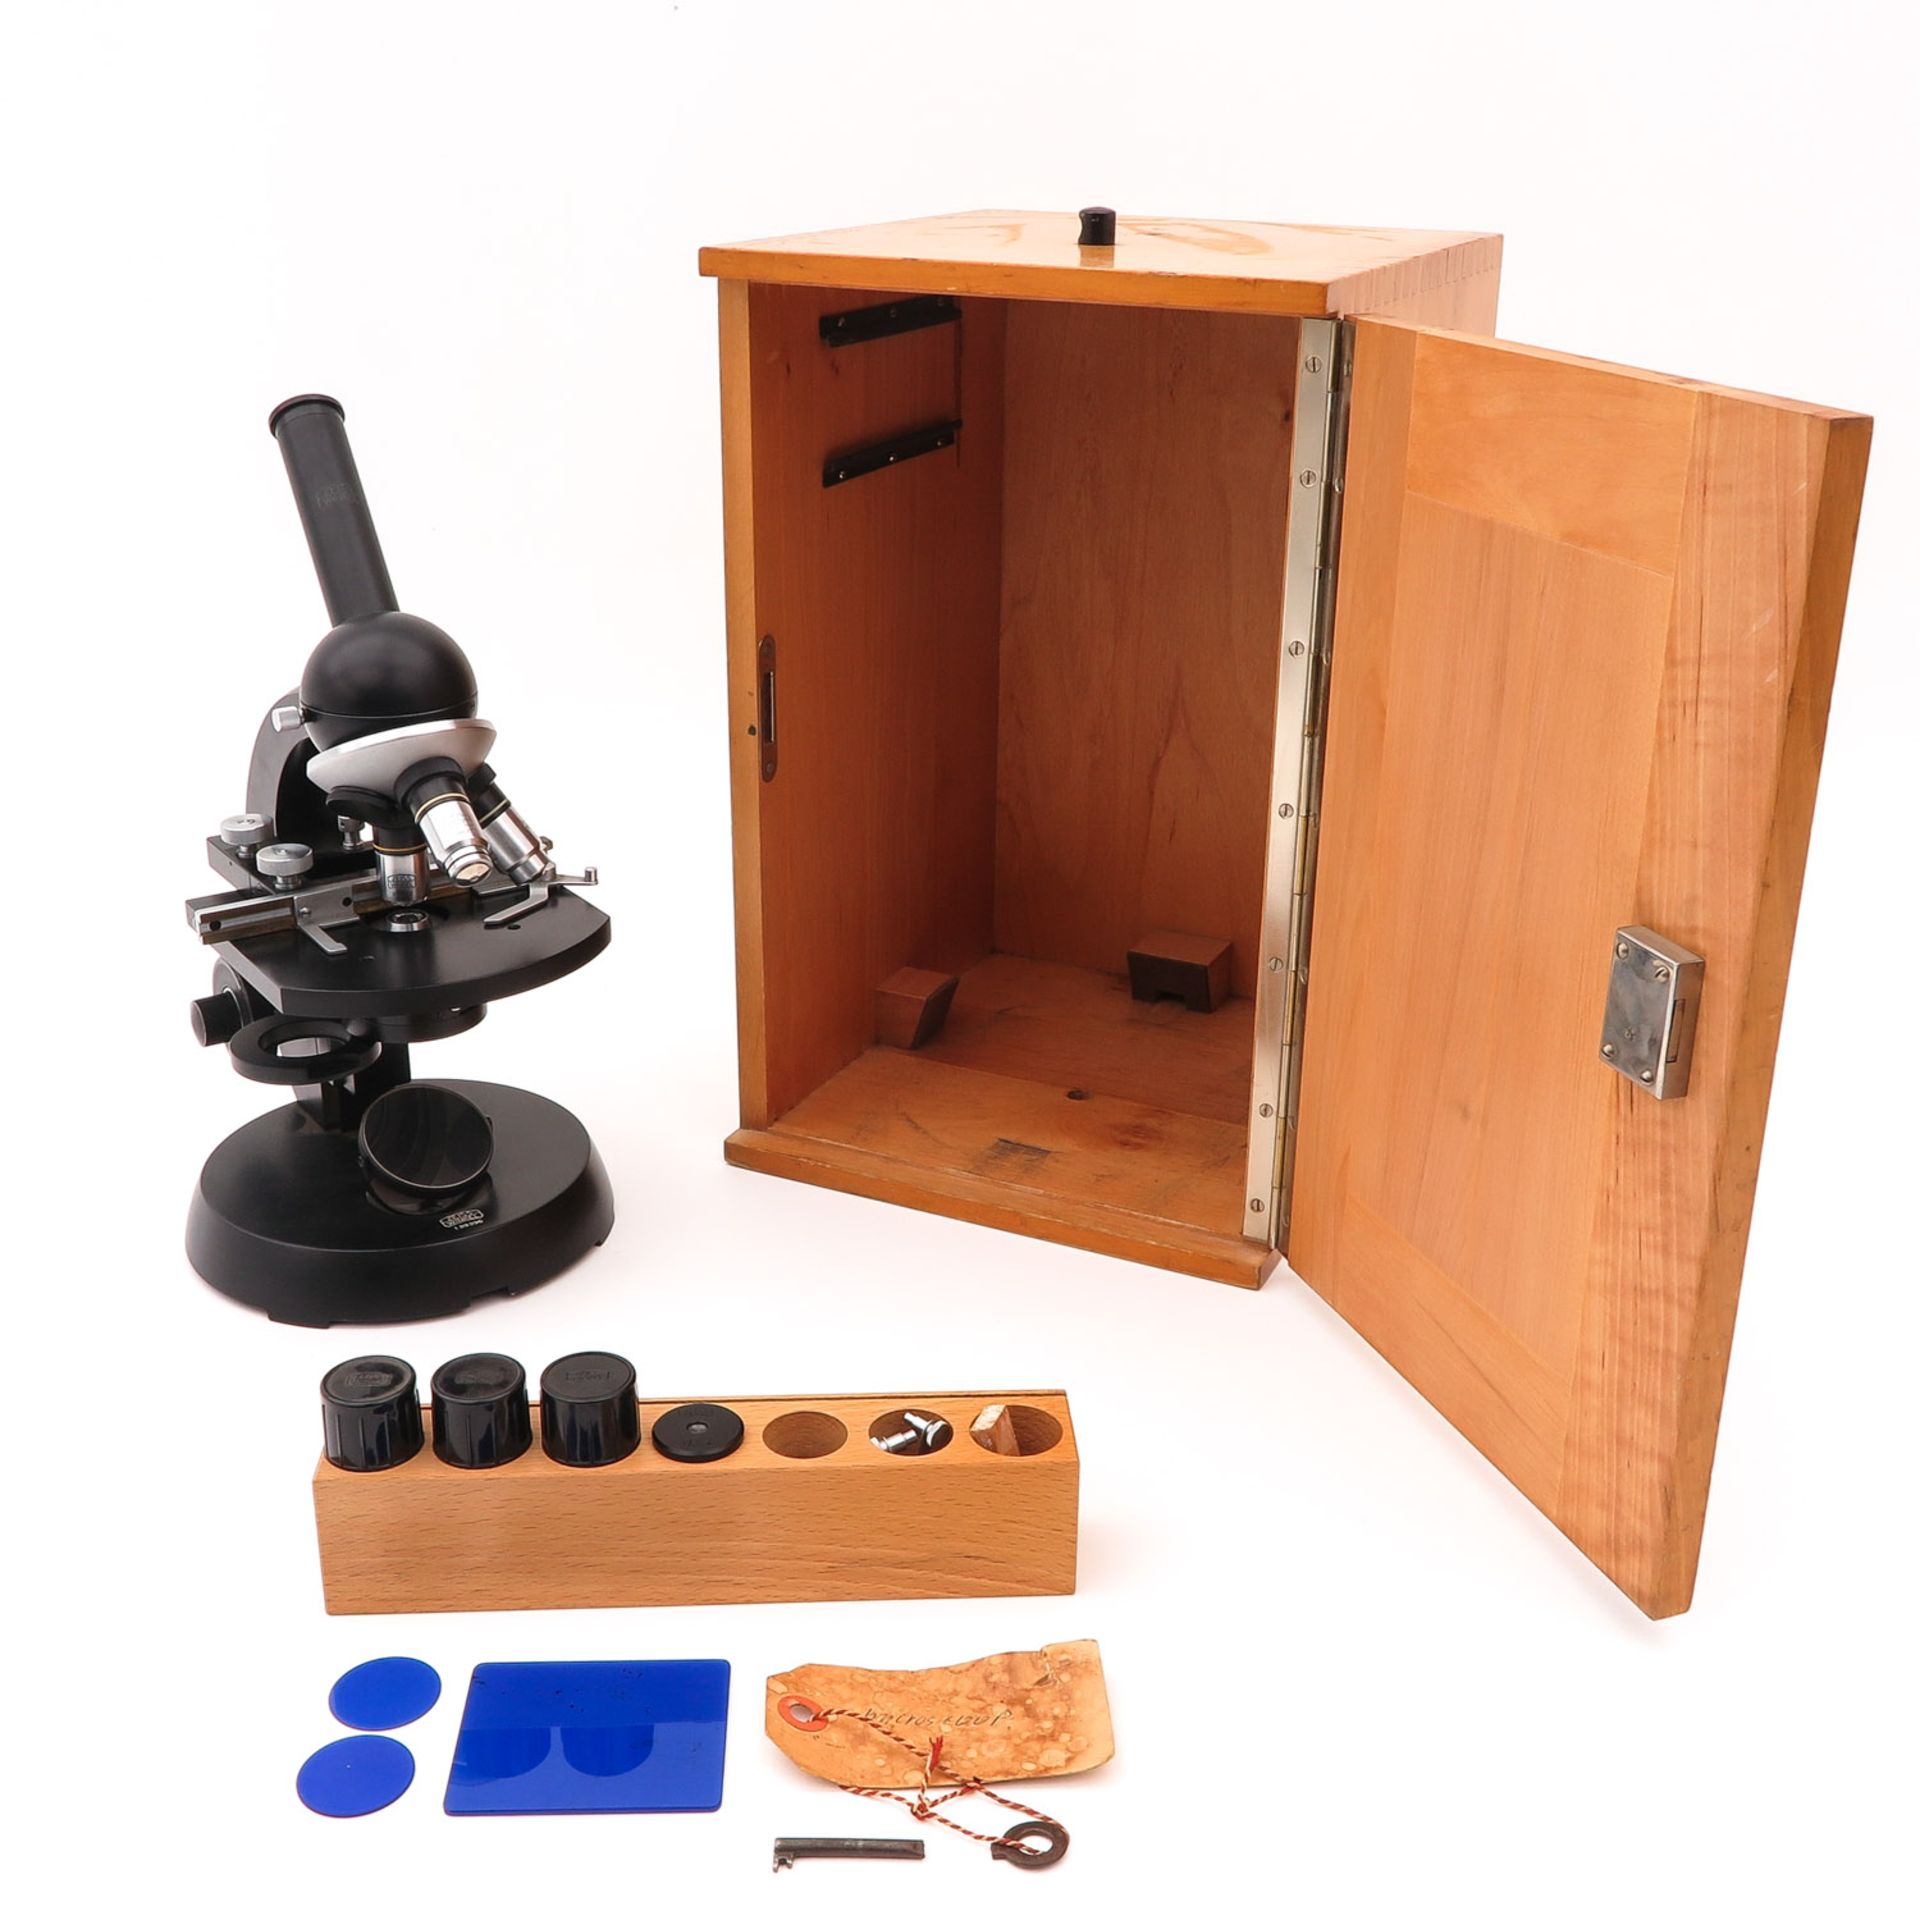 A Microscope with Wood Case - Image 9 of 10